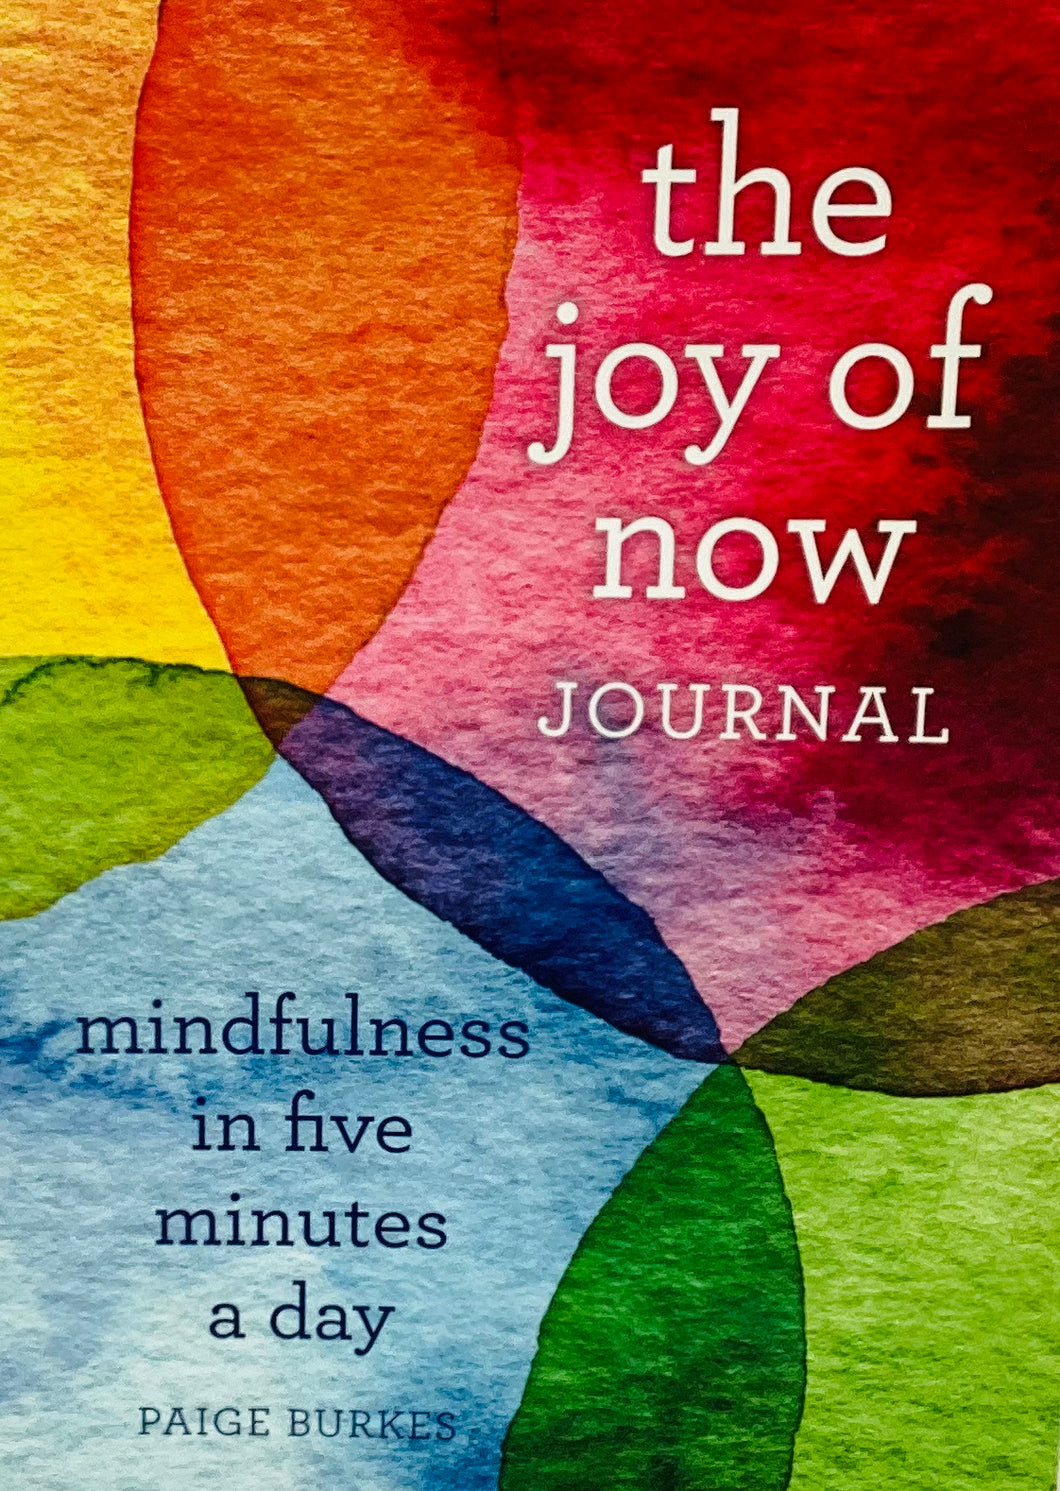 The Joy of Now Journal